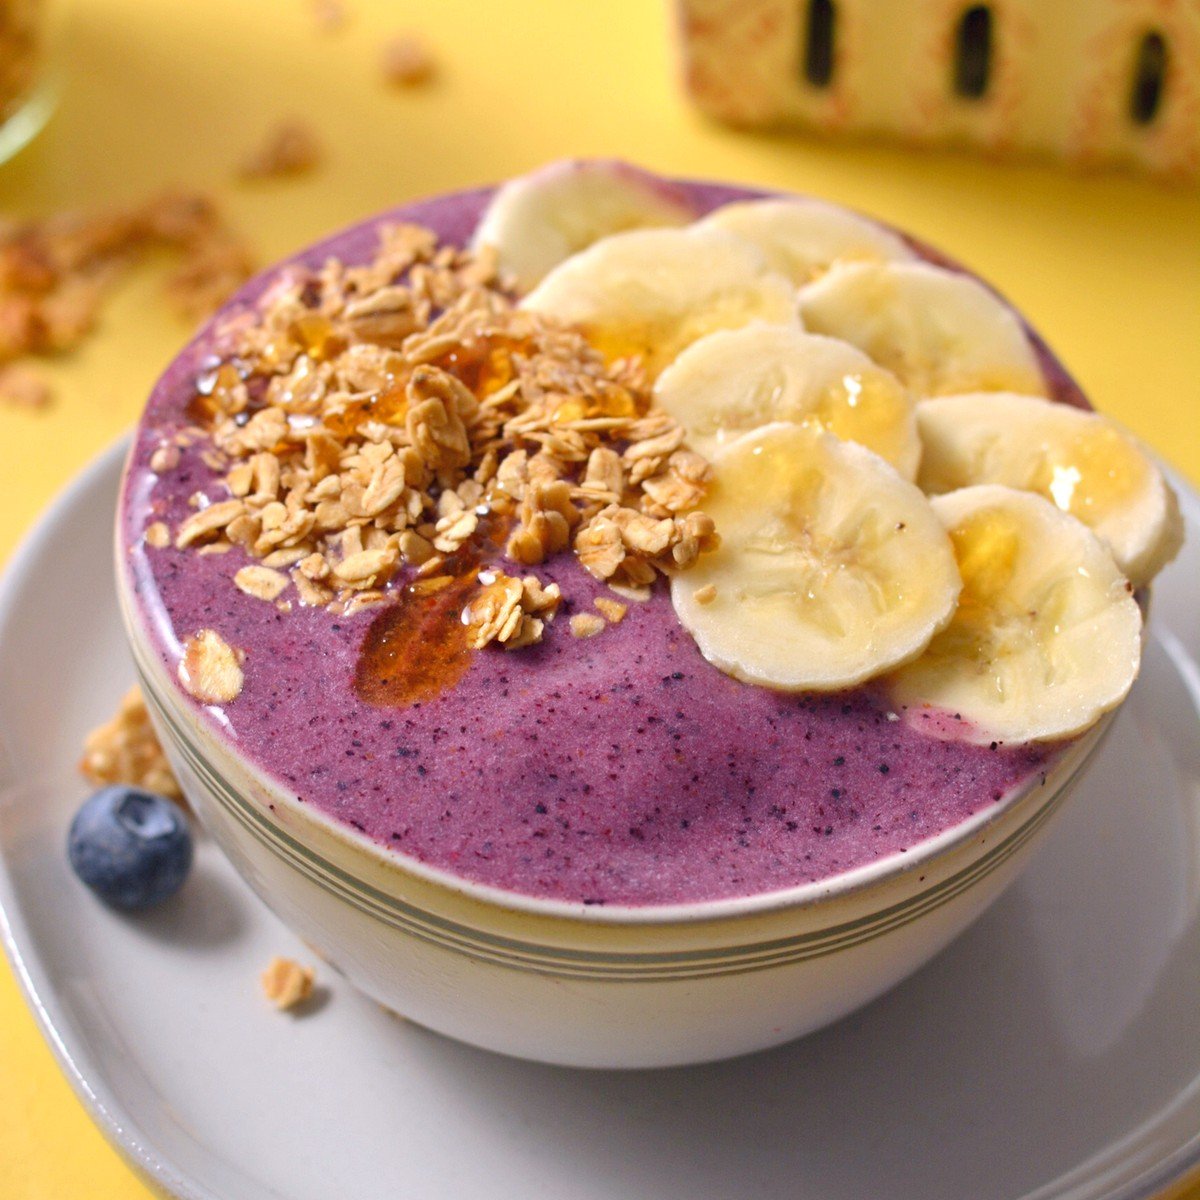 Purple smoothie bowl with bananas and granola on top and a yellow background.